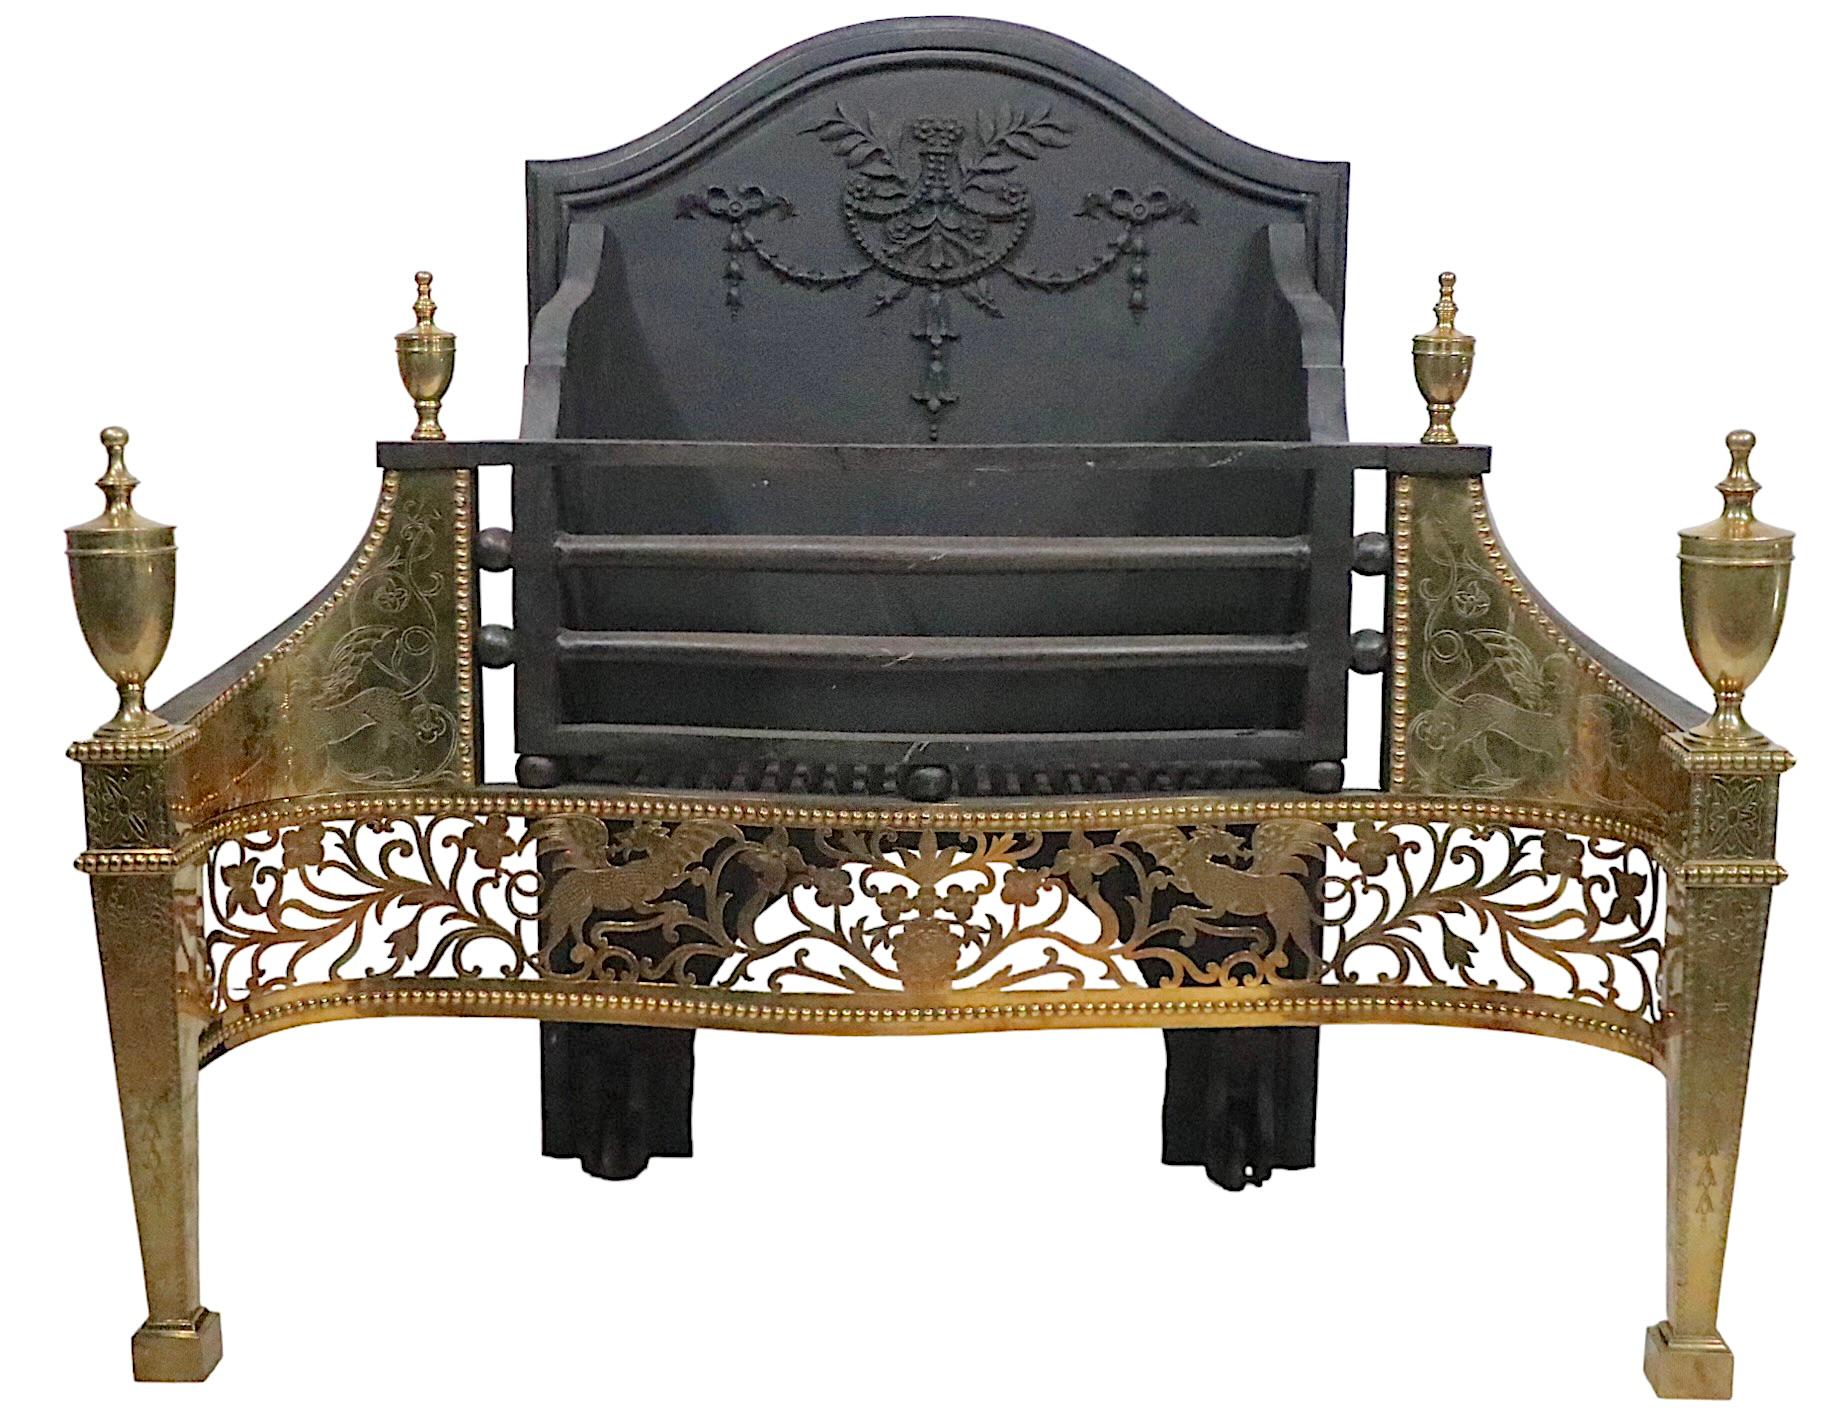 British Classical Revival English Hoole Cast Iron and Brass Fireplace Coal Grate Insert 